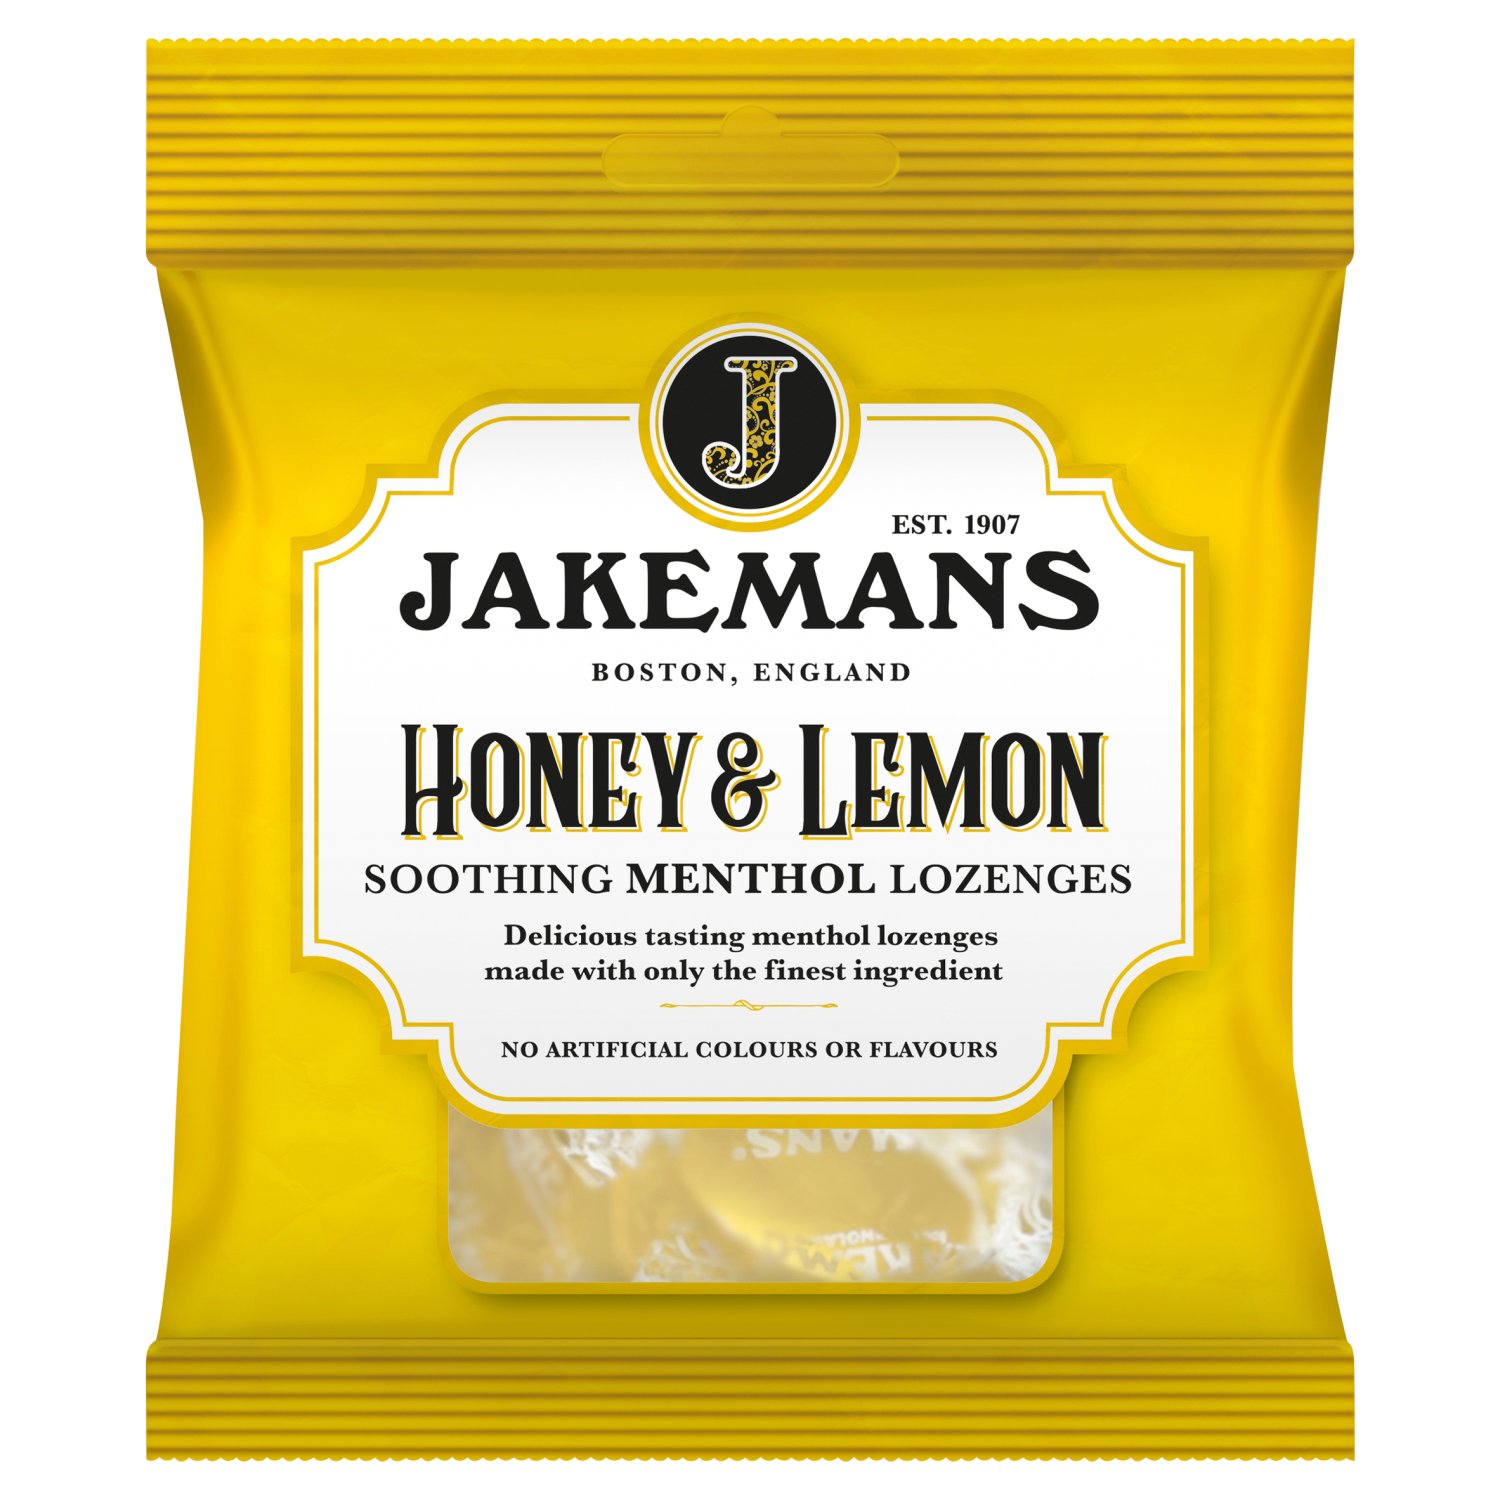 Jakemans lozenges are made with only the finest ingredients, carefully blended with menthol to obtain a unique mouthwatering and refreshing taste.
Once tasted they will be your favourite soothing lozenge